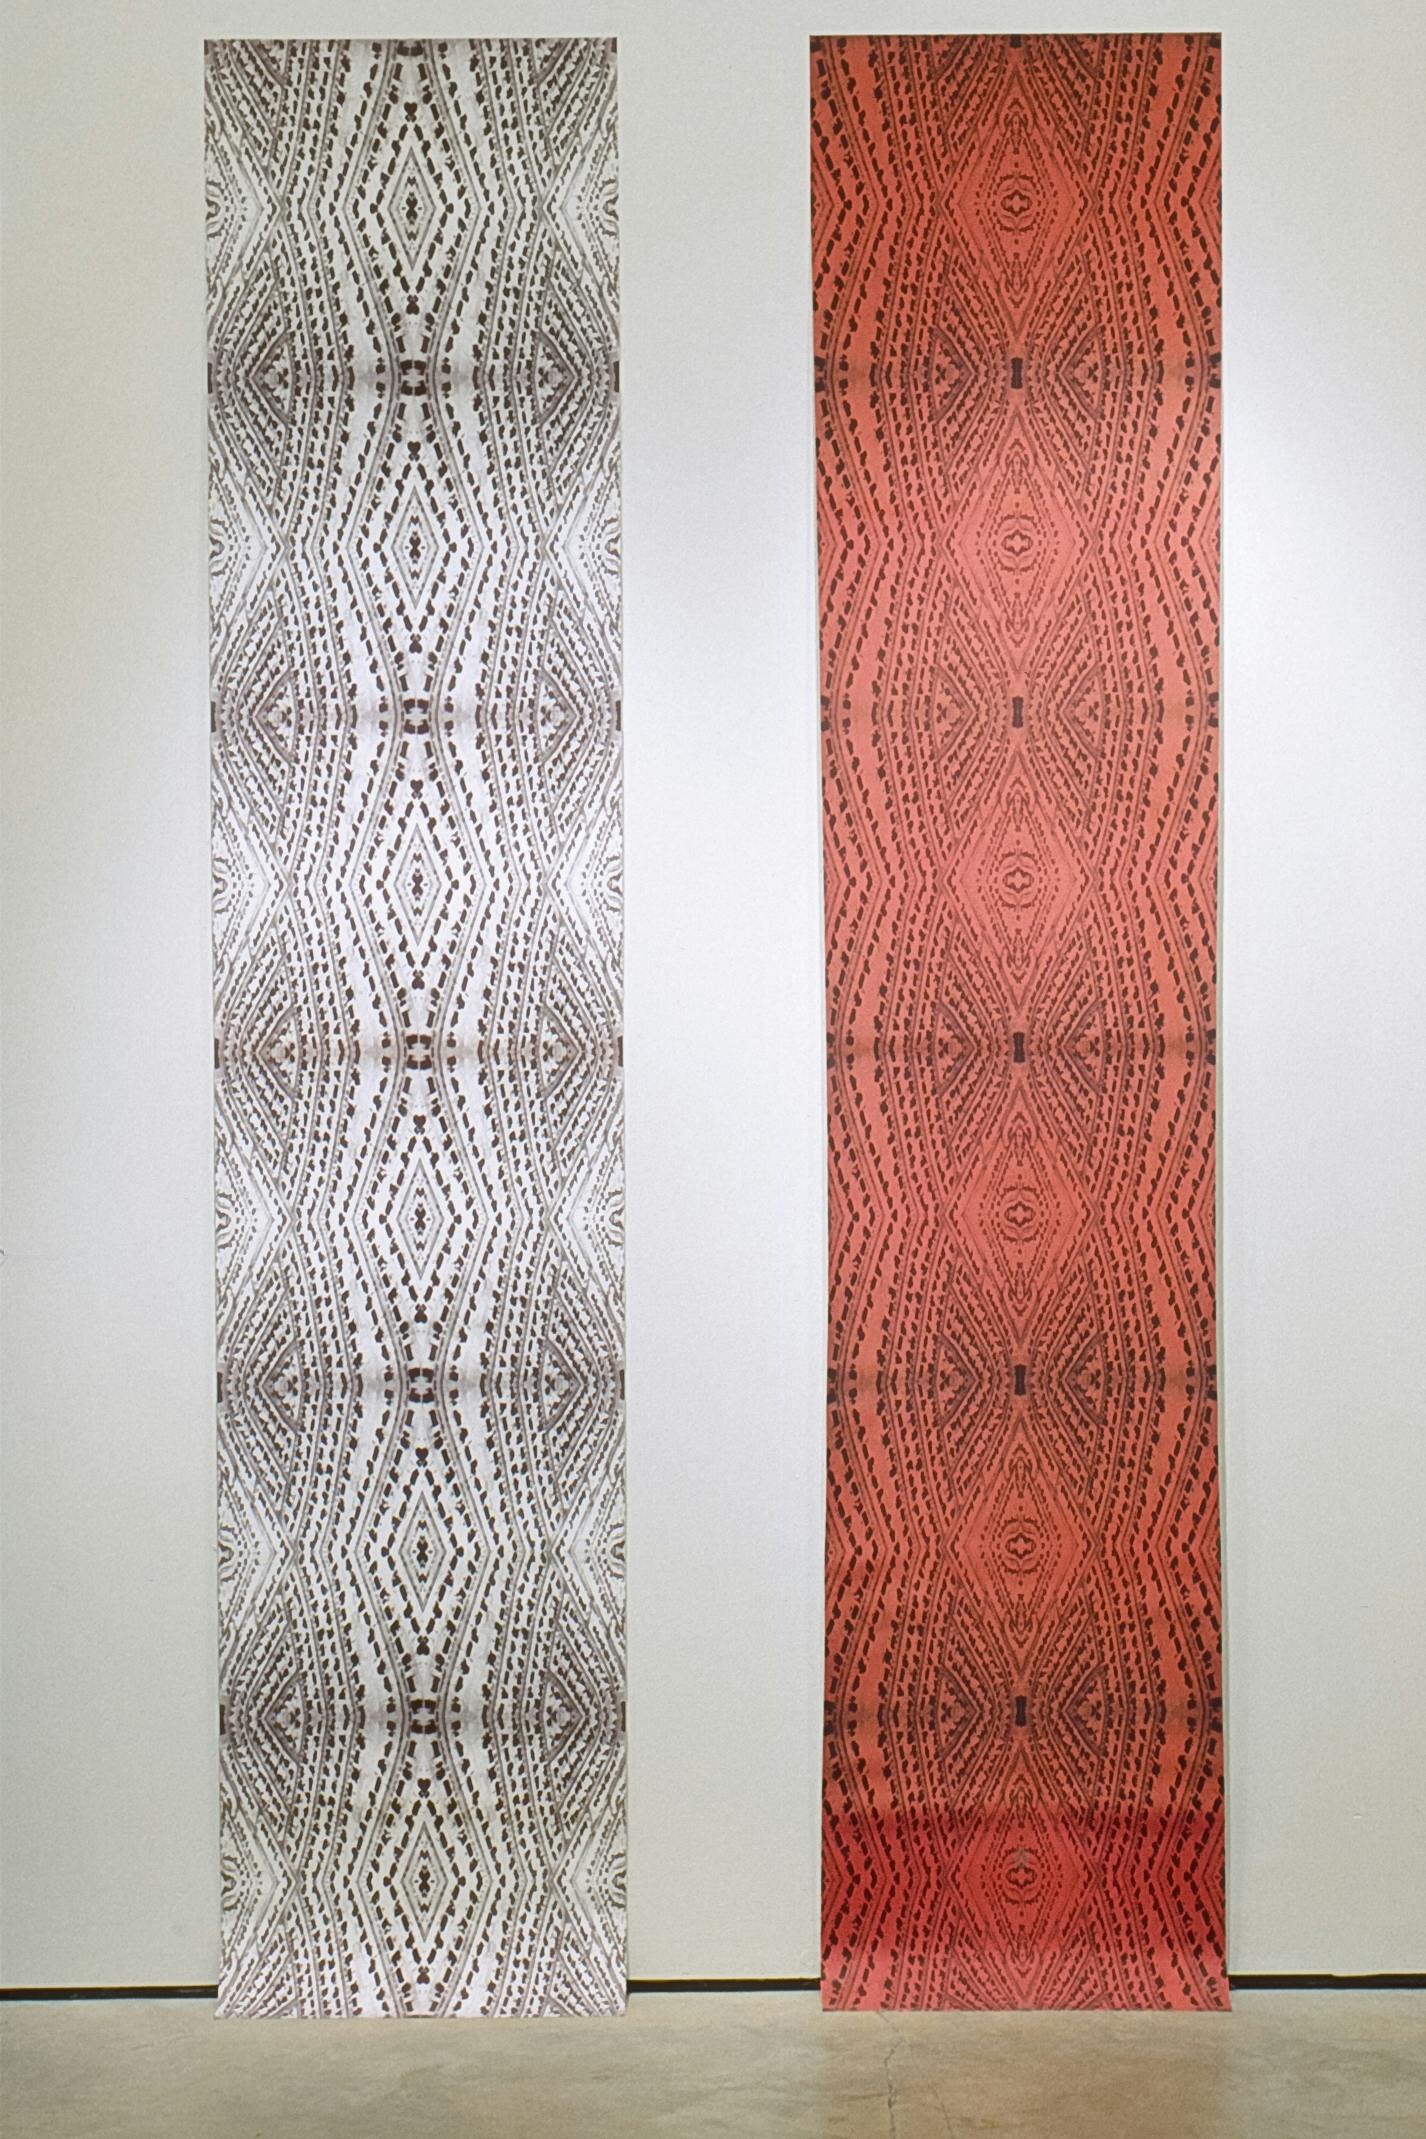 Two scrolls are installed side by side on the white gallery wall. Both have similar intricate patterns printed on the surfaces. The one on the left is white and the one on the right is red.  